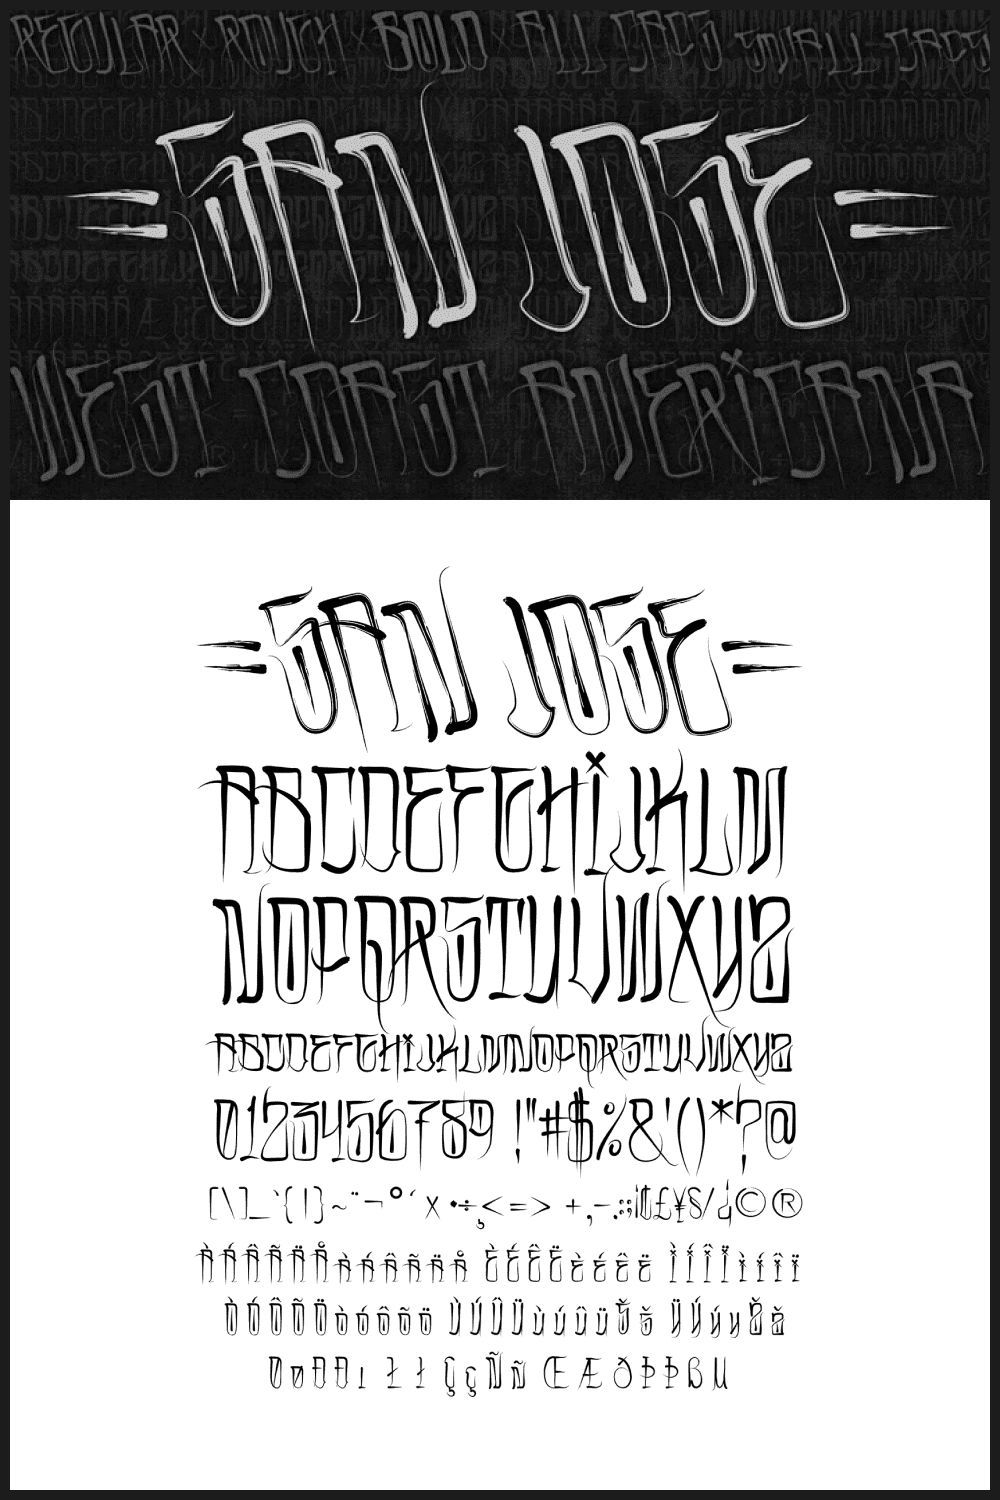 The San Jose type family provides an array of variants representing a simplified, bay area slant on traditional Chicano American street scripts.